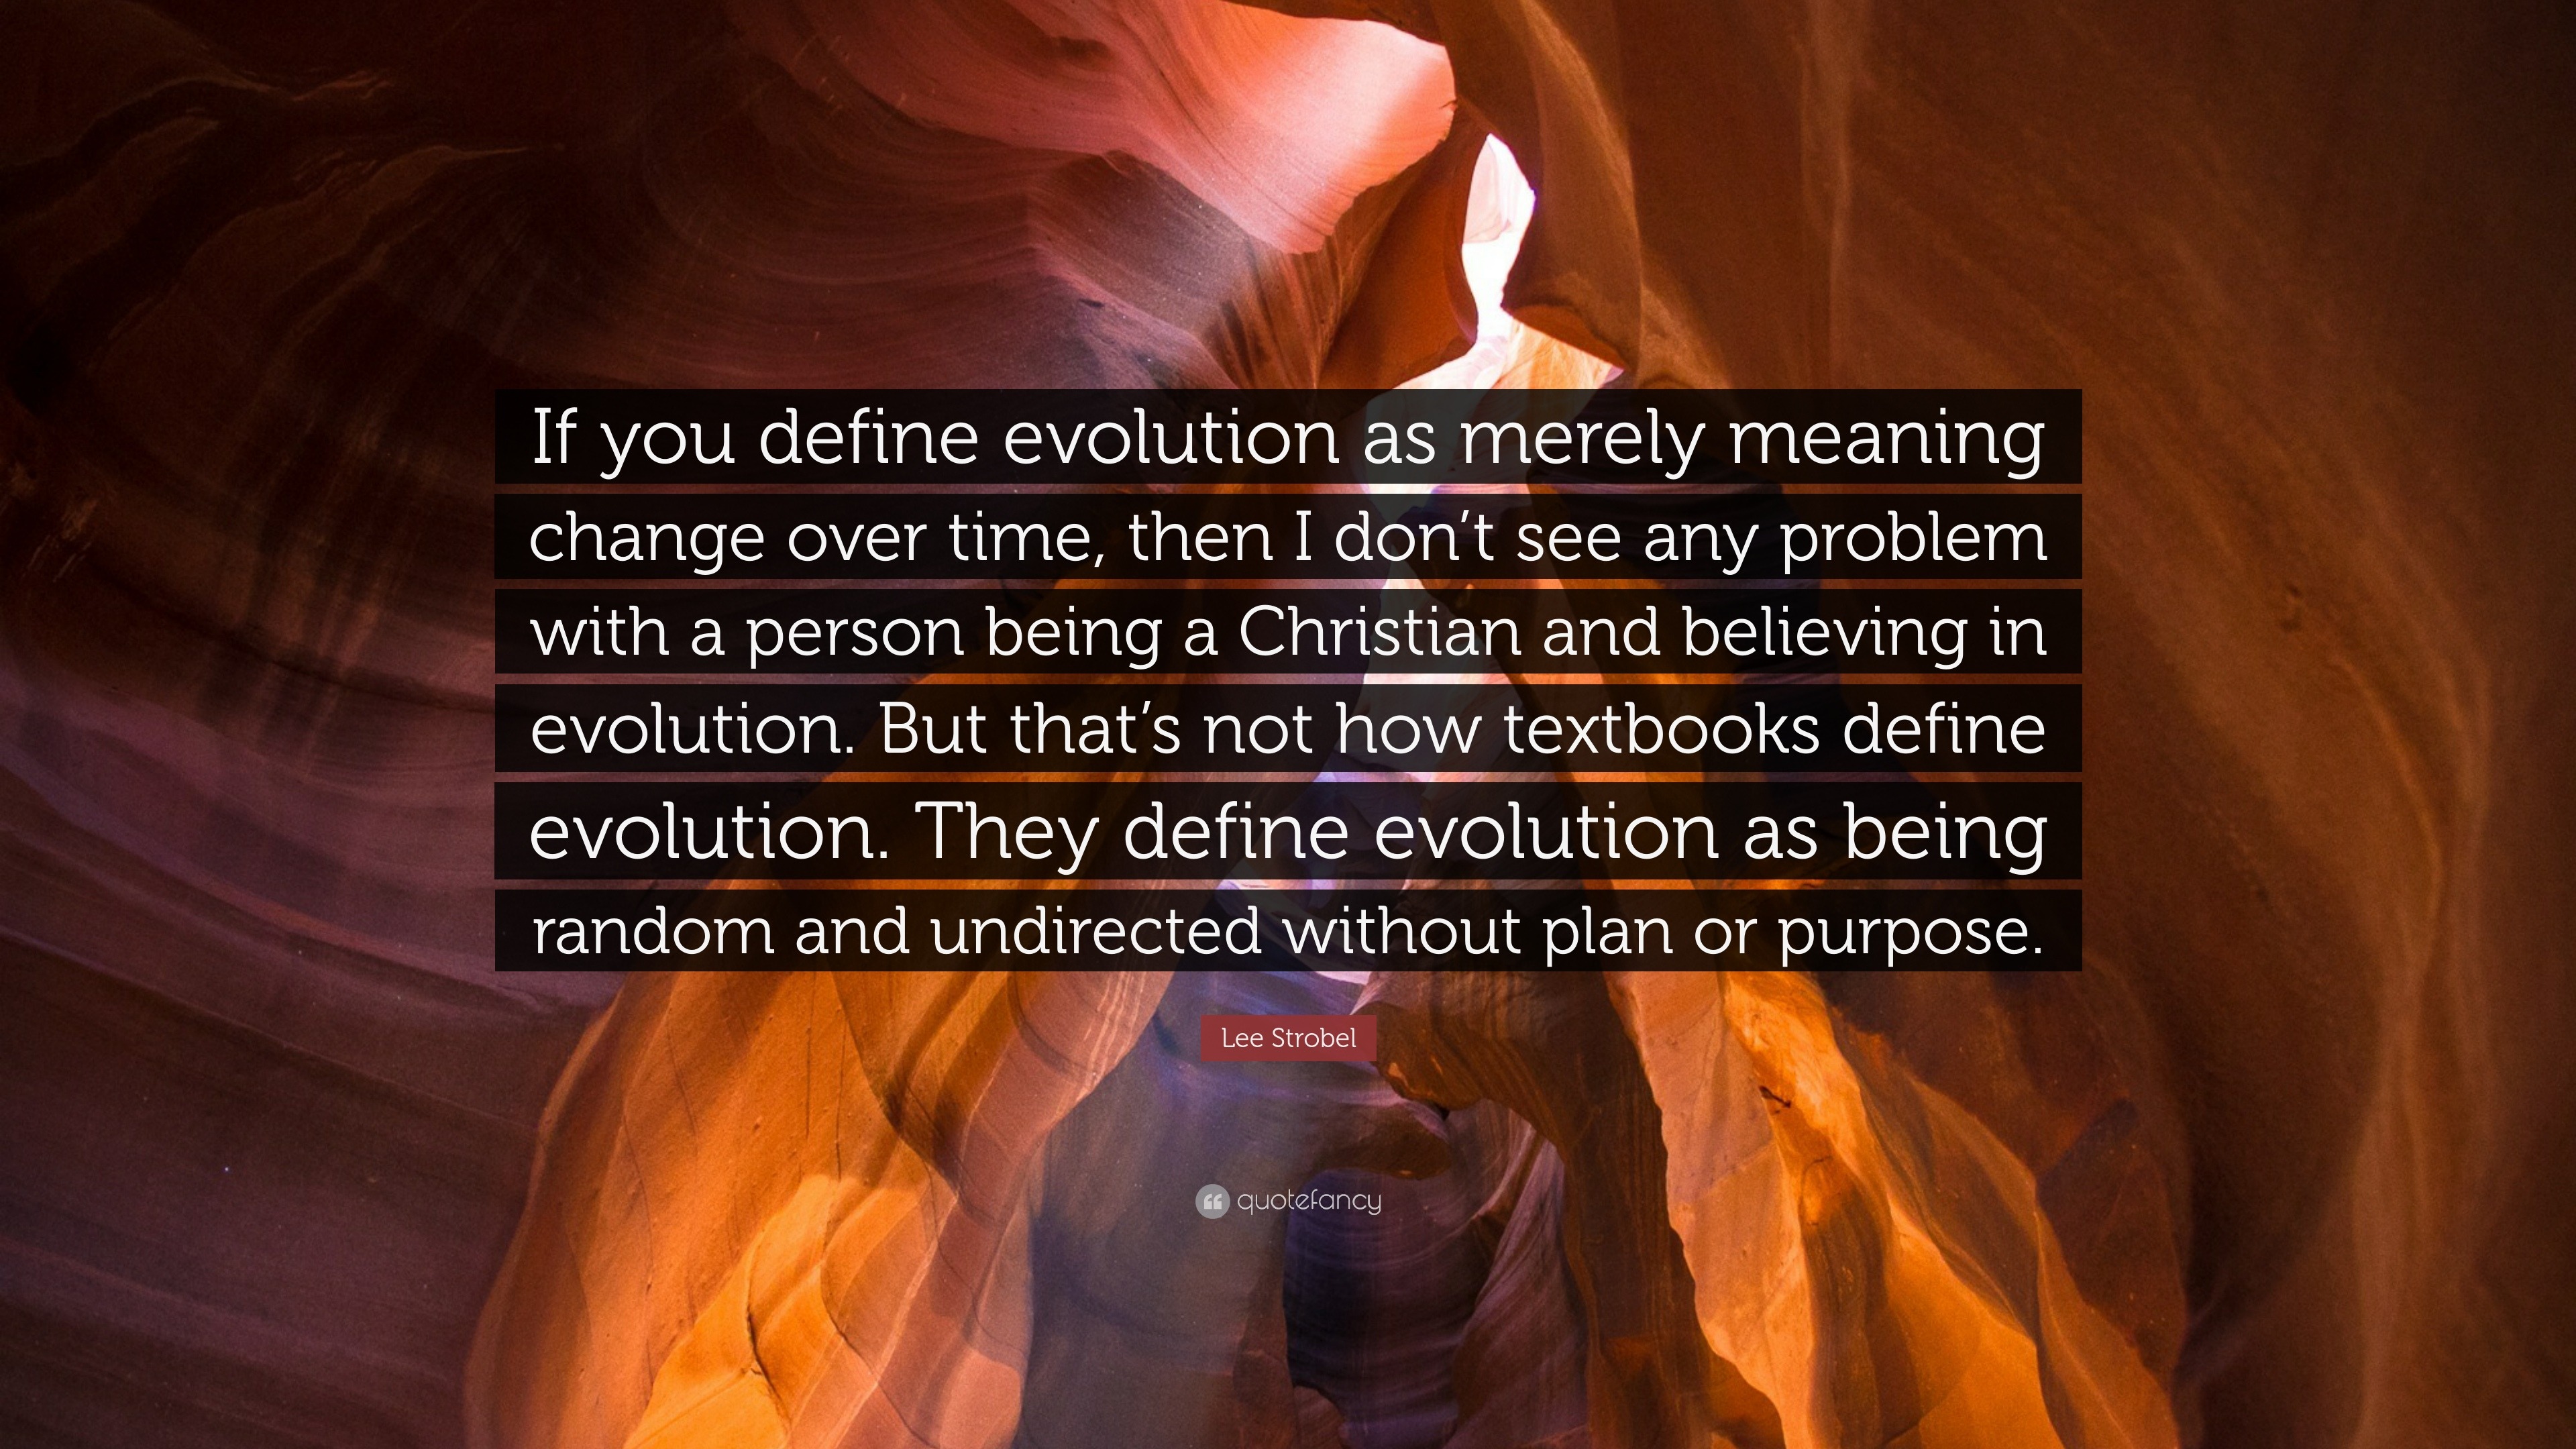 Lee Strobel Quote: “If you define evolution as merely meaning change over  time, then I don't see any problem with a person being a Christian...”